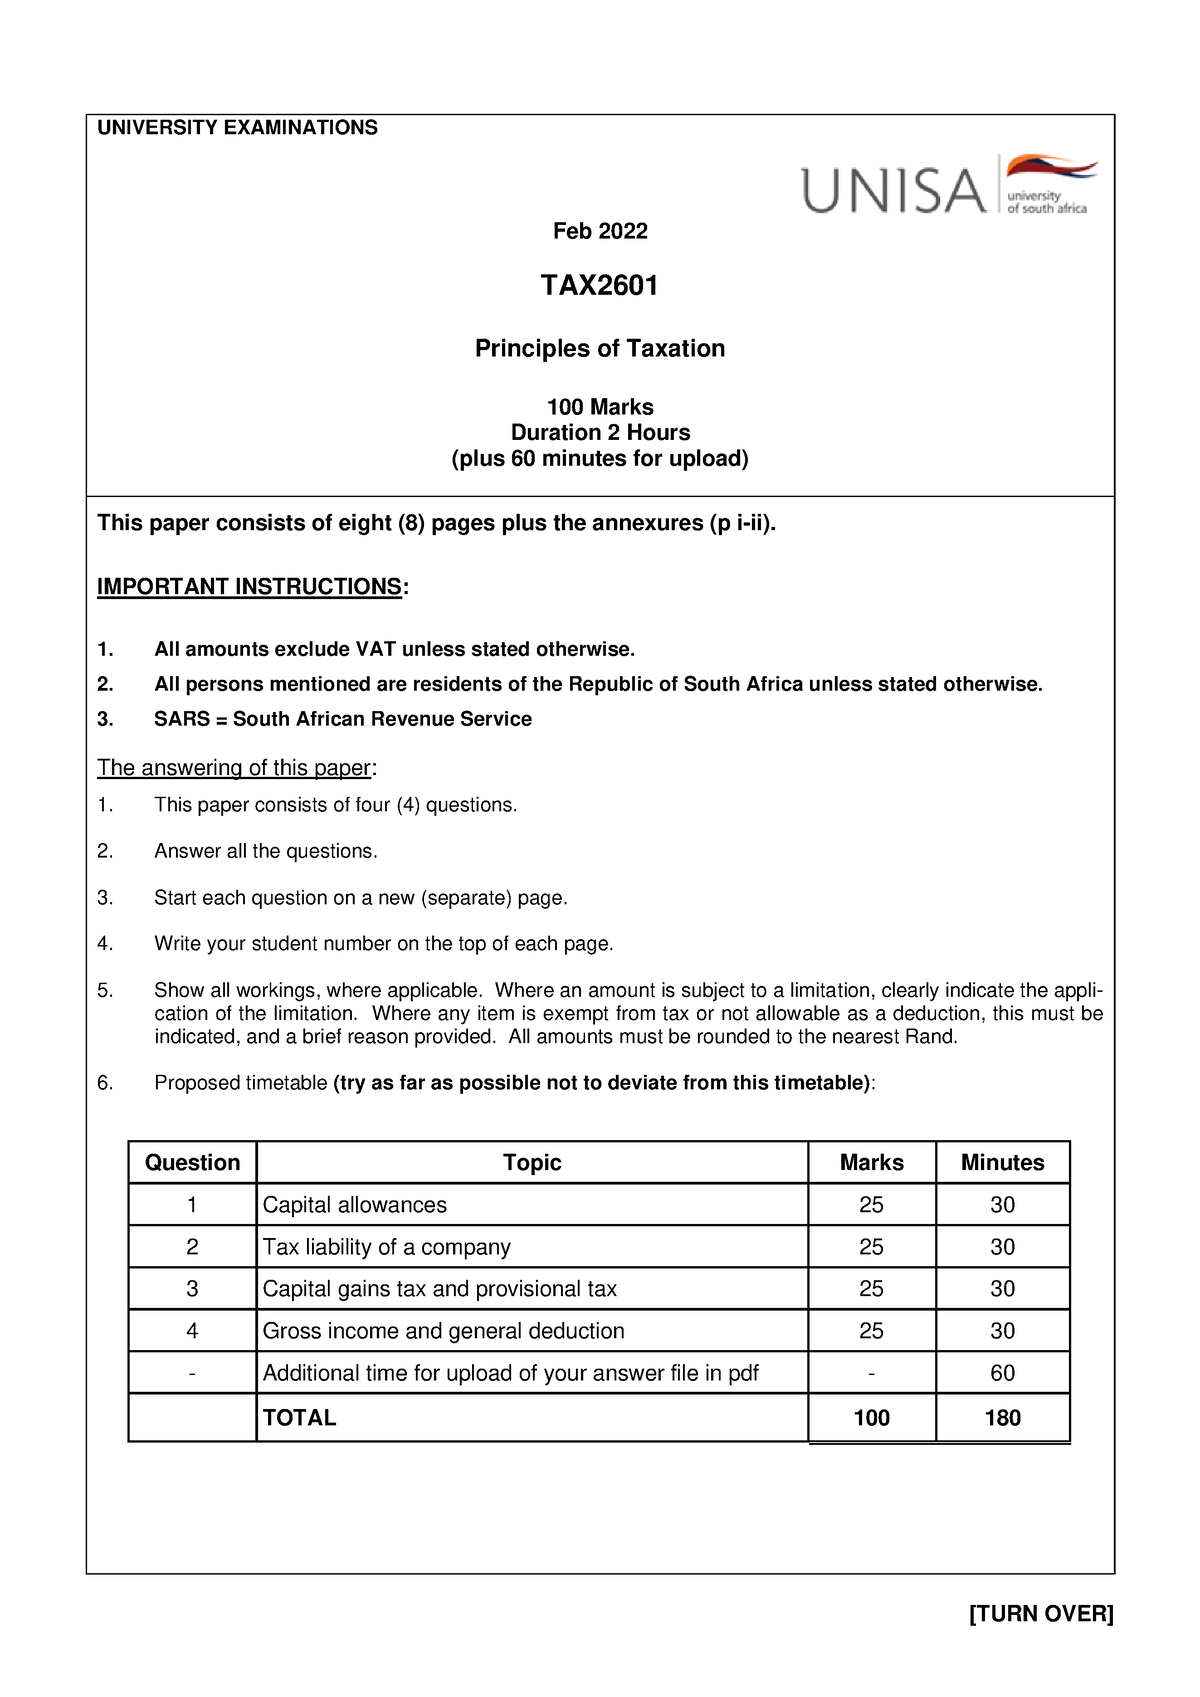 tax2601 assignment 5 solution 2022